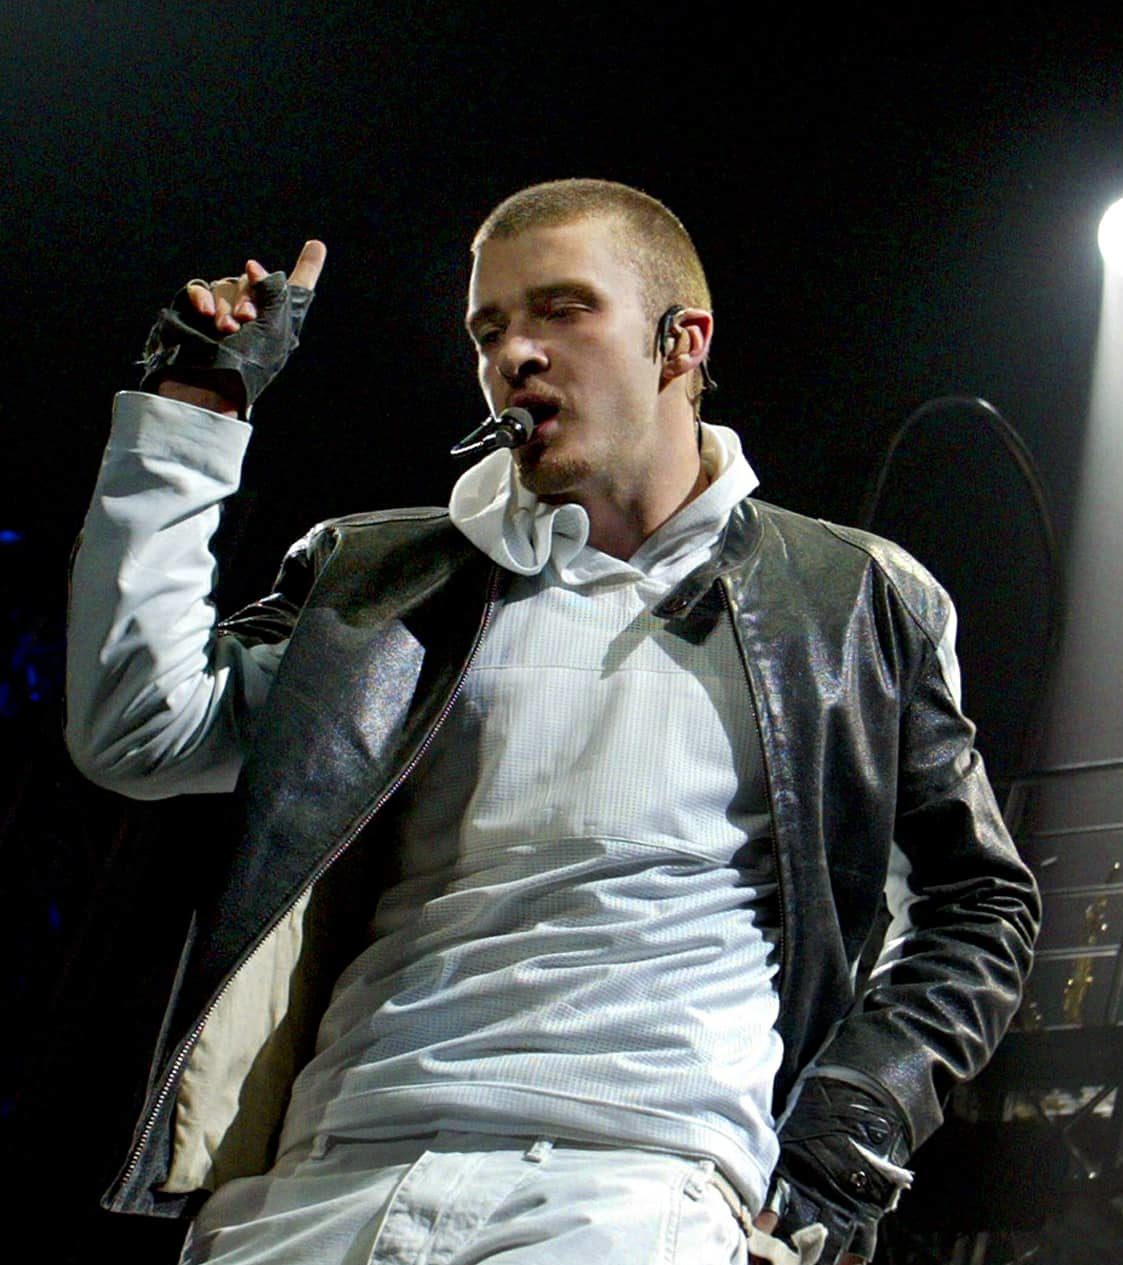 u-s-singer-justin-timberlake-performs-on-stage-at-the-sheffield-arena-during-his-first-date-of-a-uk